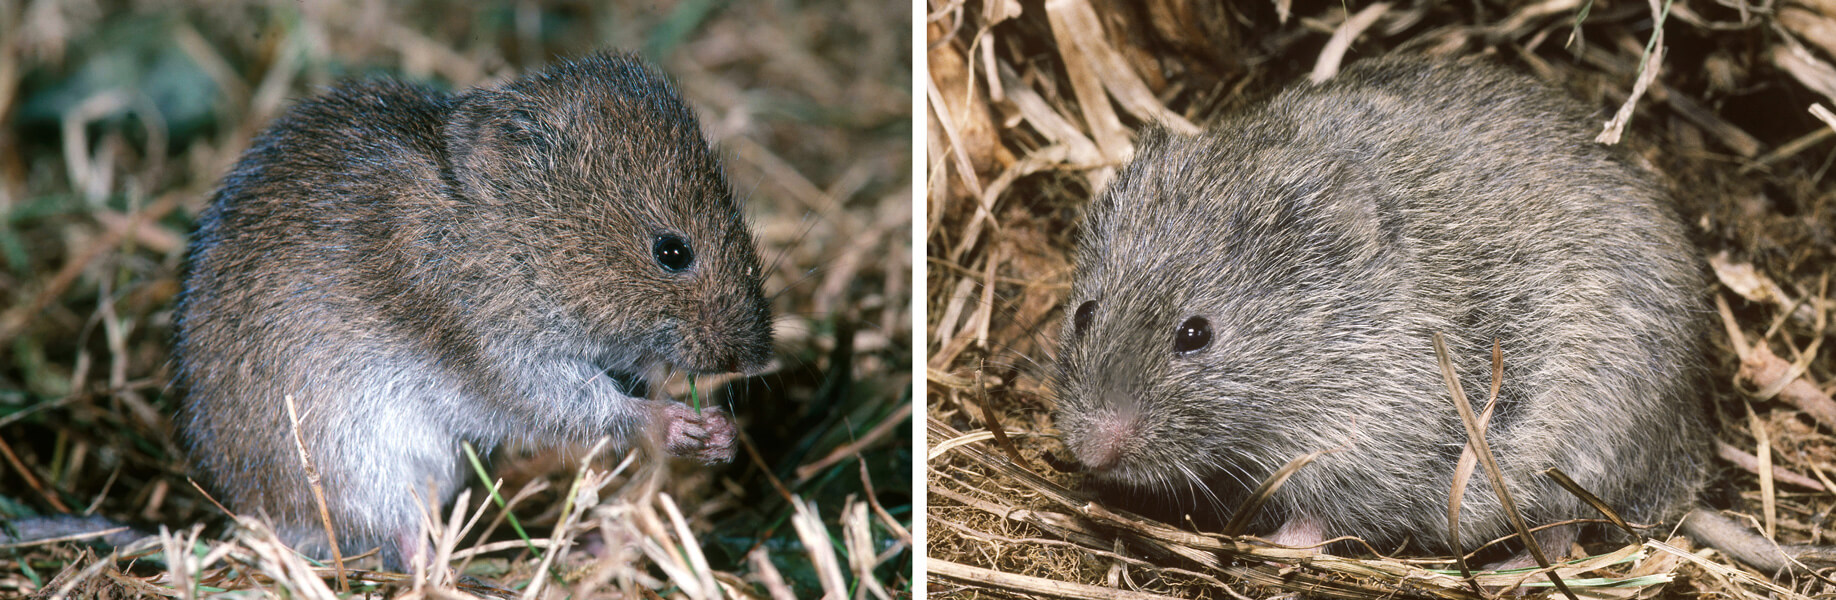 Side-by-side photographs of a meadow vole and a prairie vole.